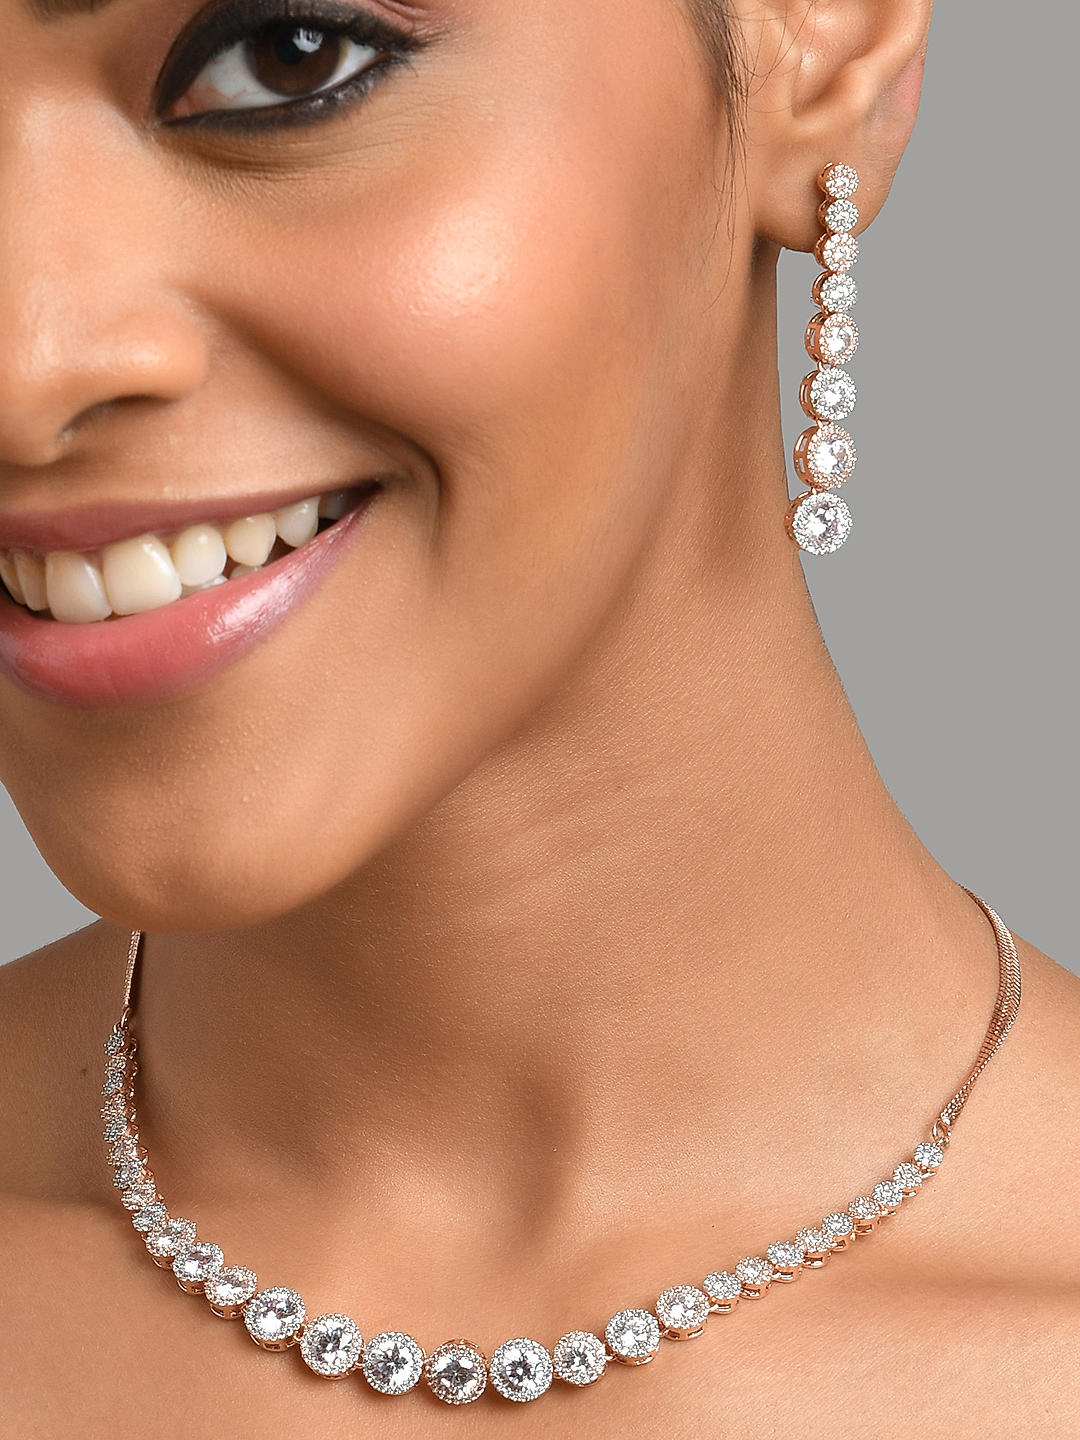 Dazzling Diamond Necklace Sets - Shop Now for Stunning Designs – Jewelegance